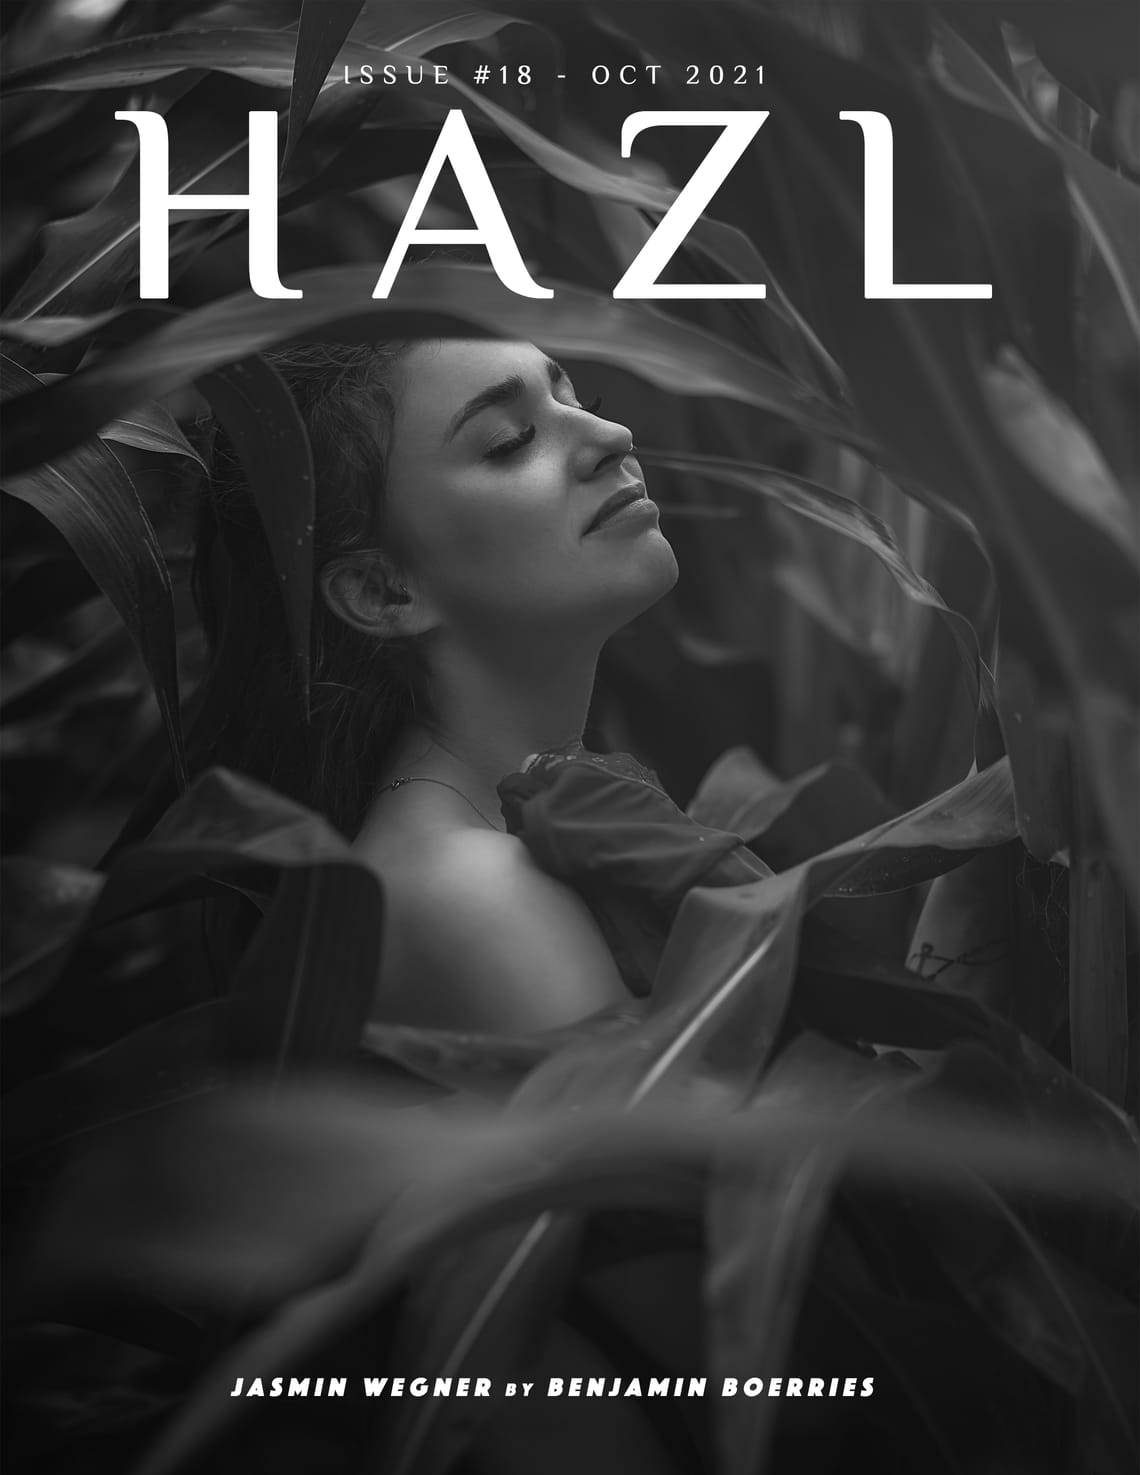 HAZL Magazine Issue #18 -  October 2021 Launched Worldwide